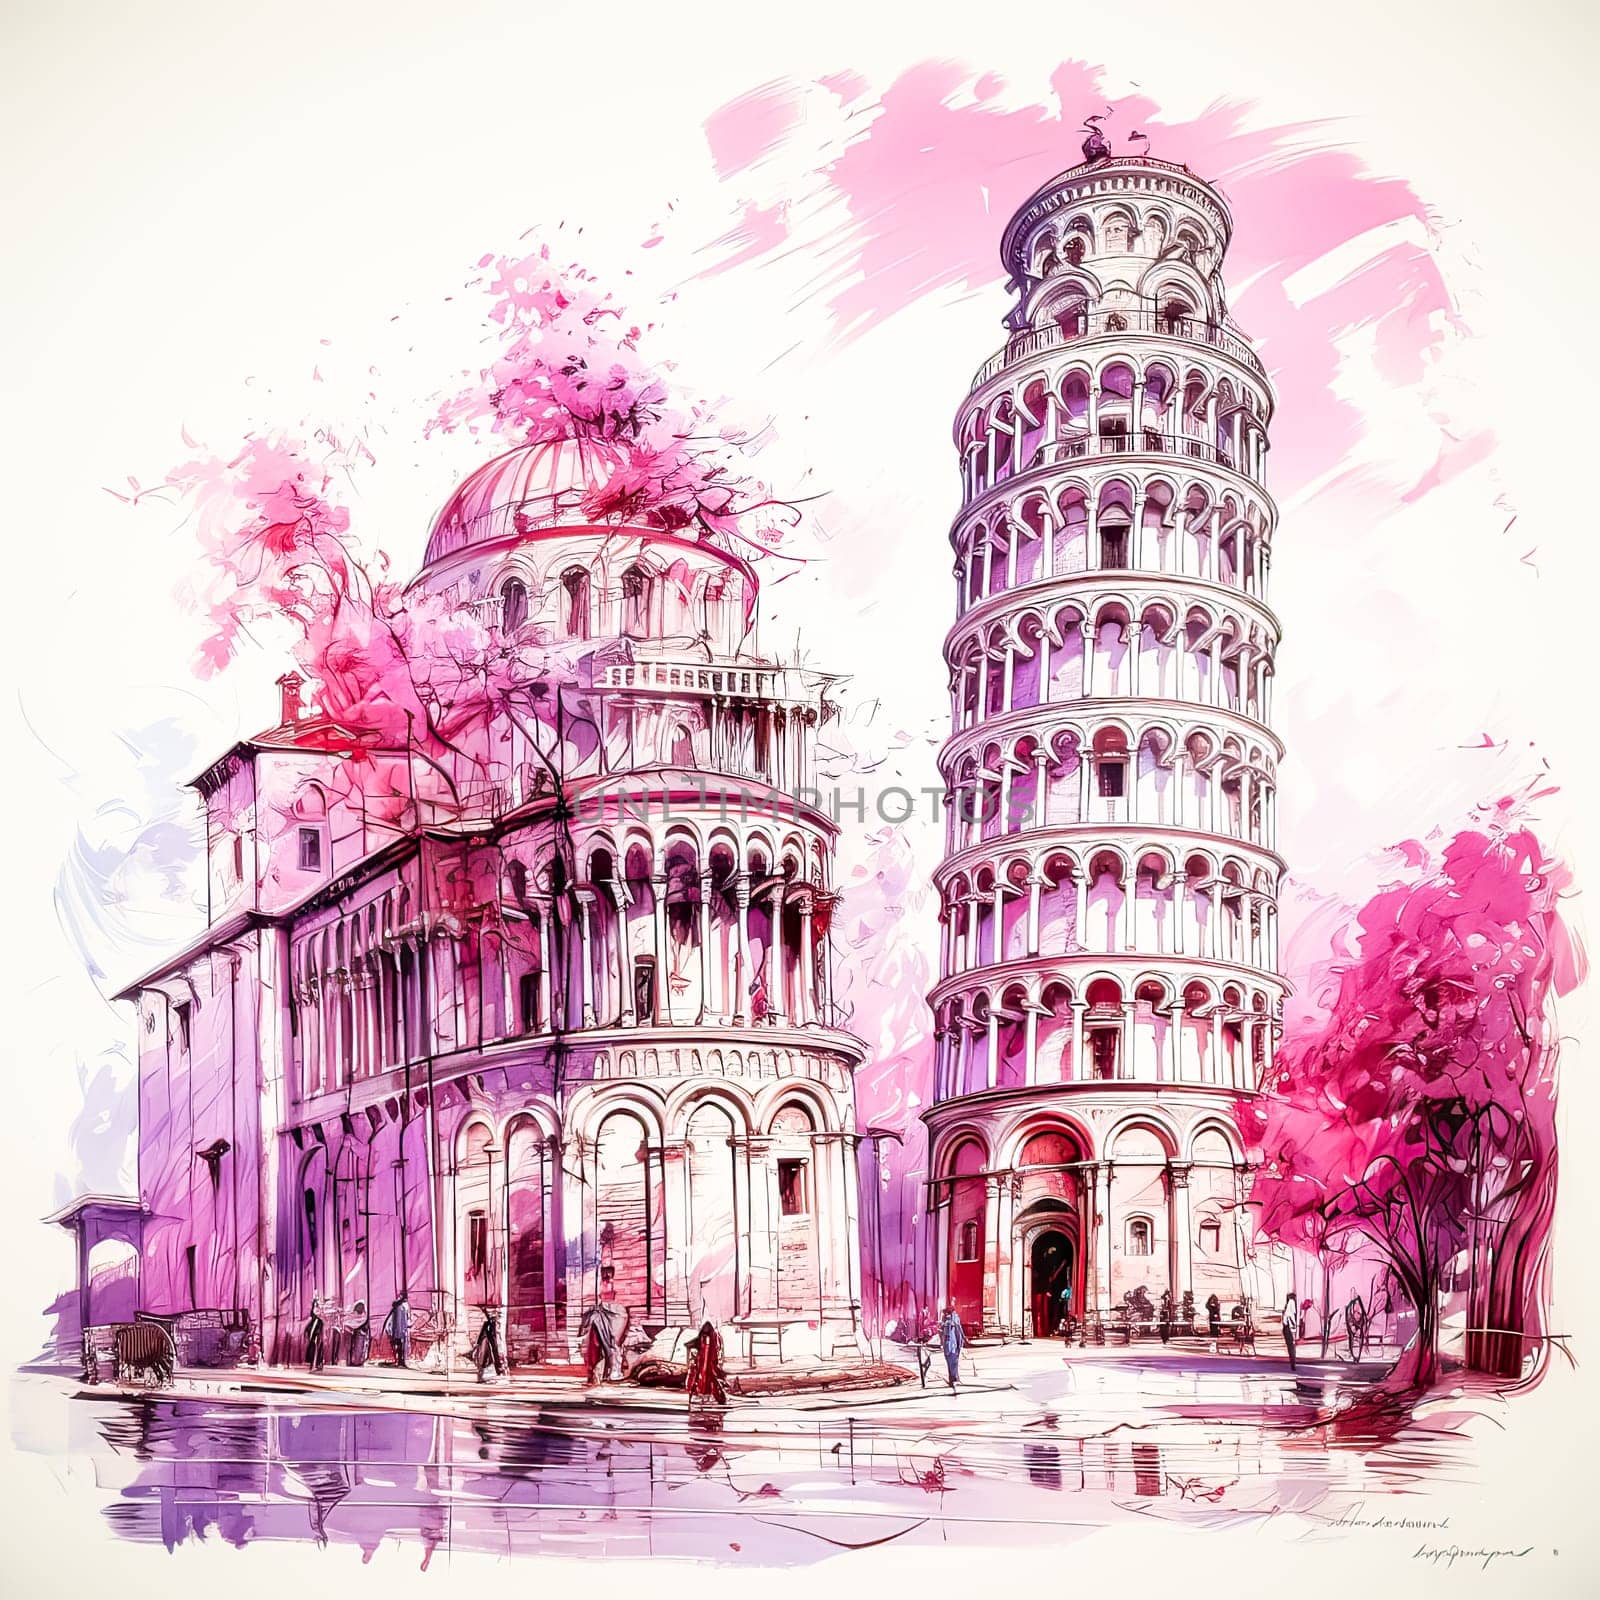 Leaning Tower of Pisa in watercolor A picturesque portrayal, capturing the iconic tilt with artistry and the allure of Italian architectural beauty